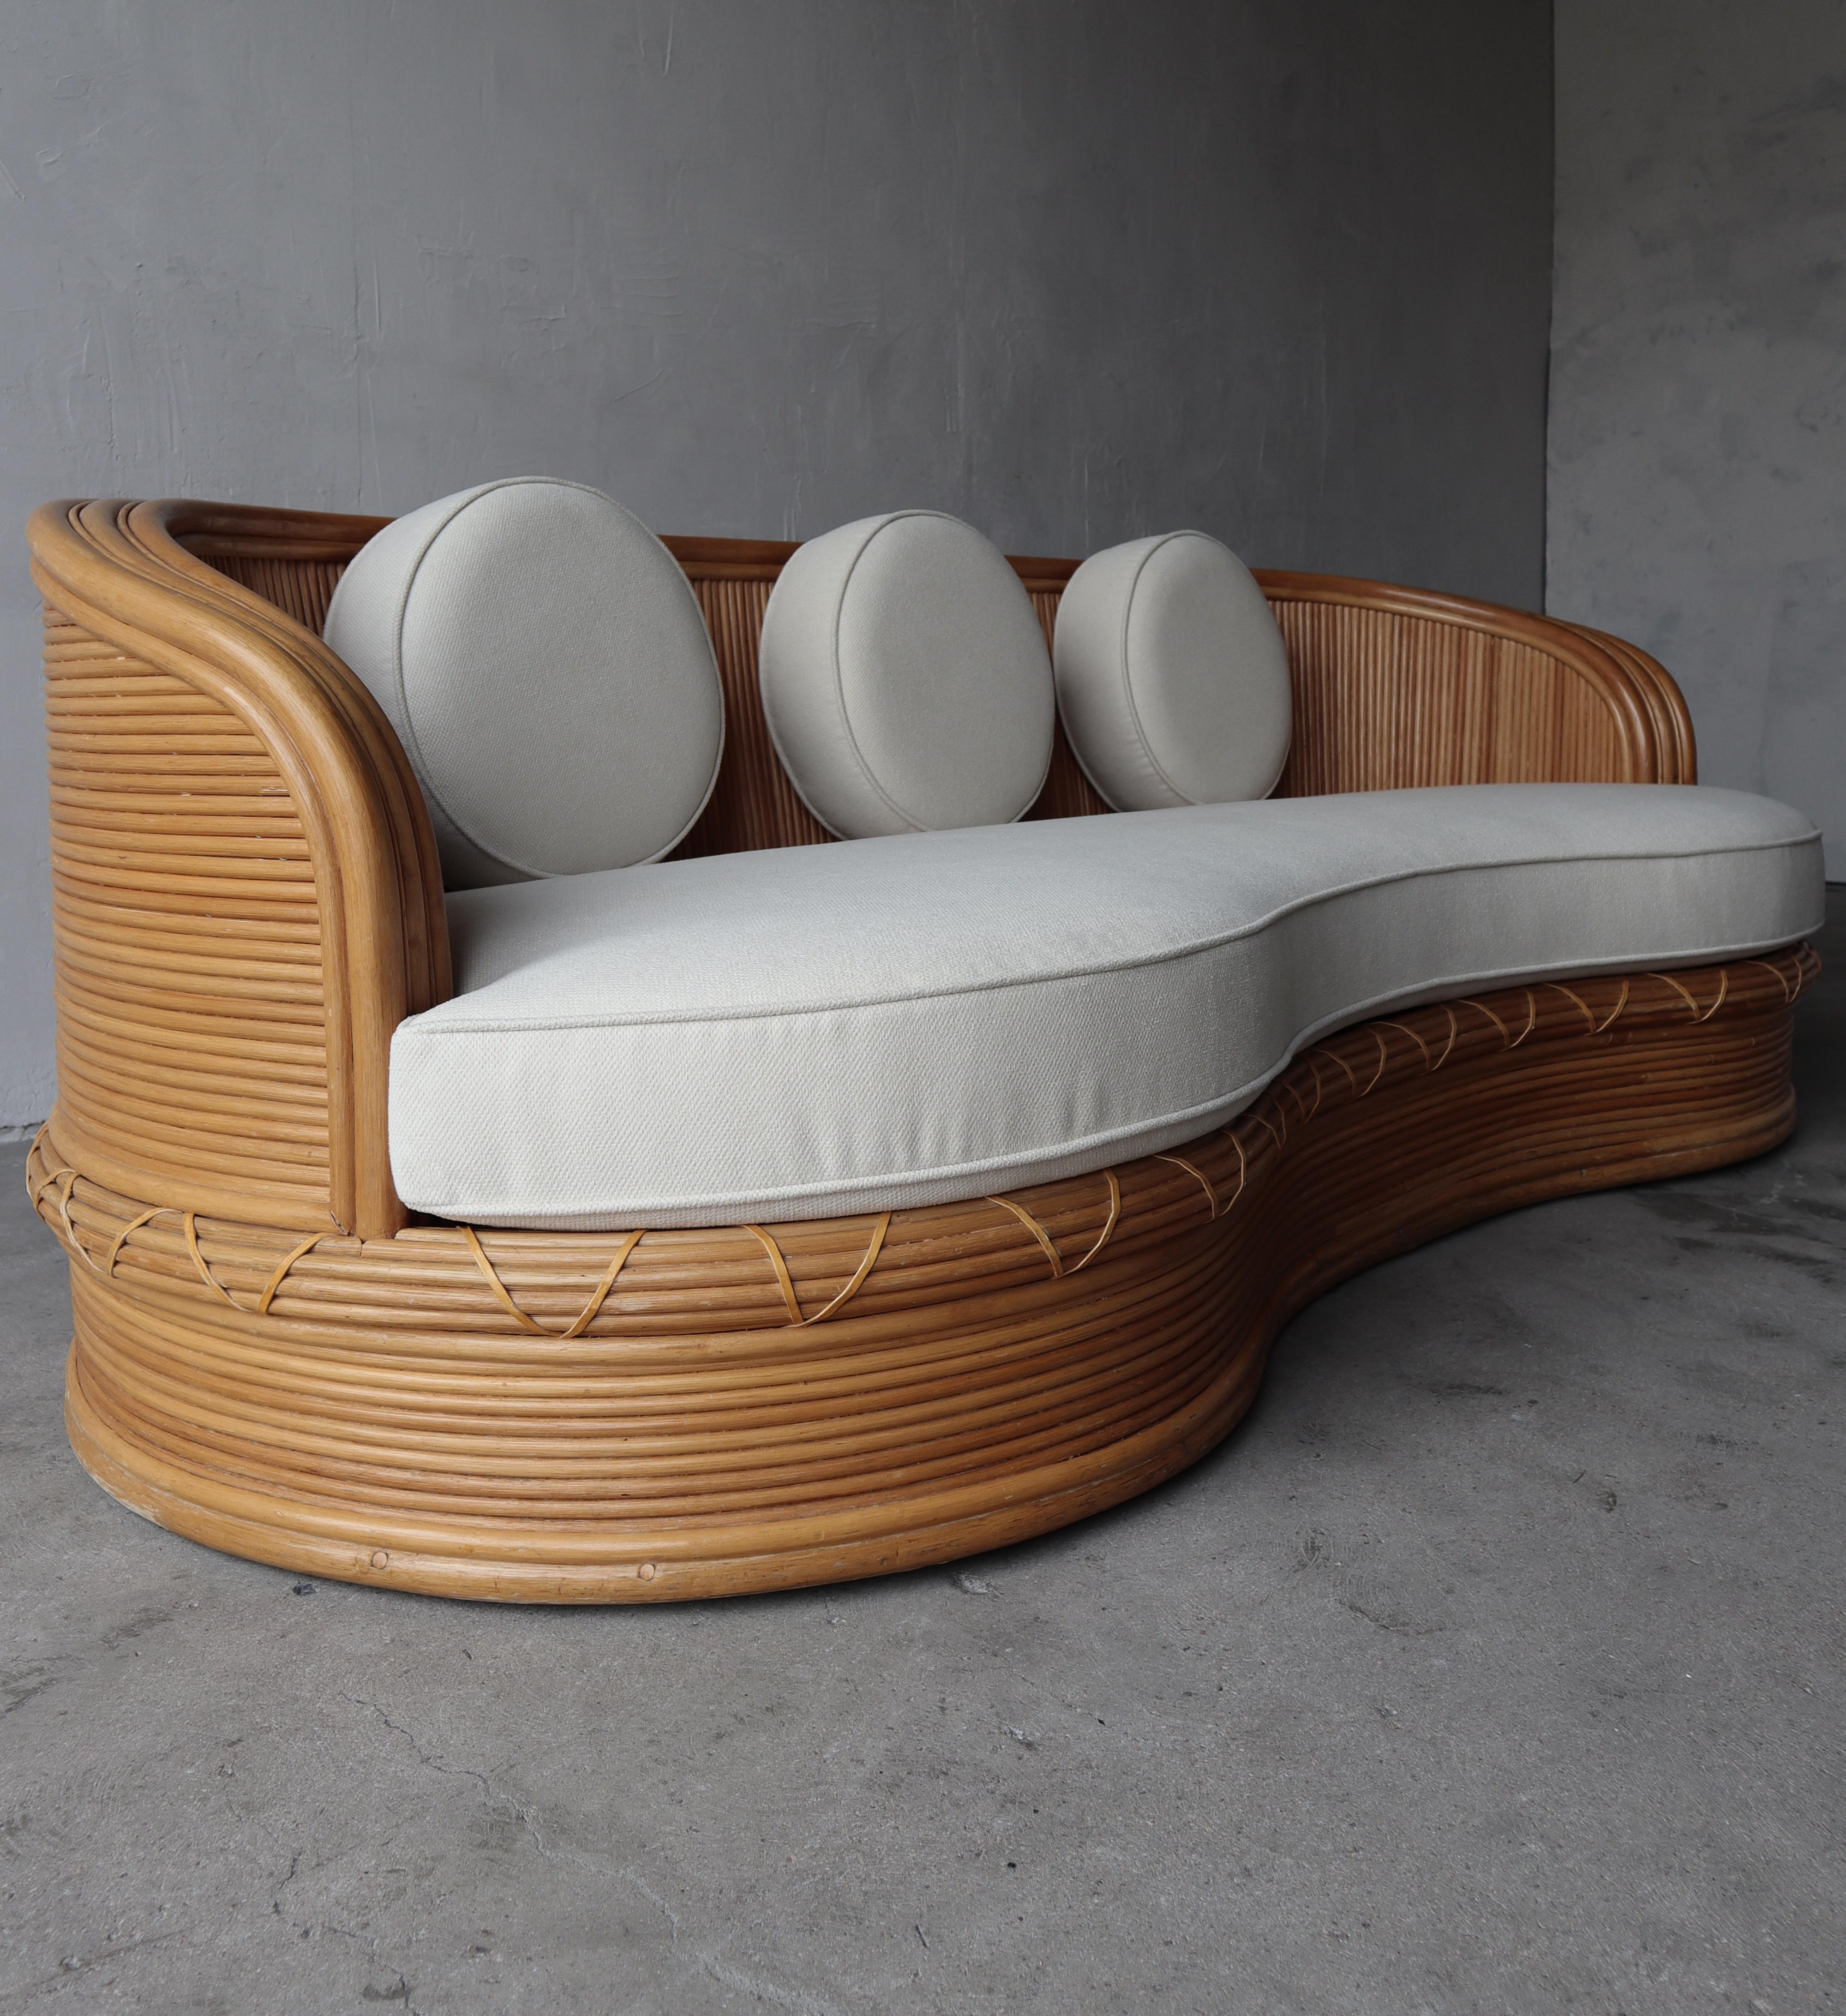 20th Century Curved Pencil Reed Bamboo Sofa & Chair